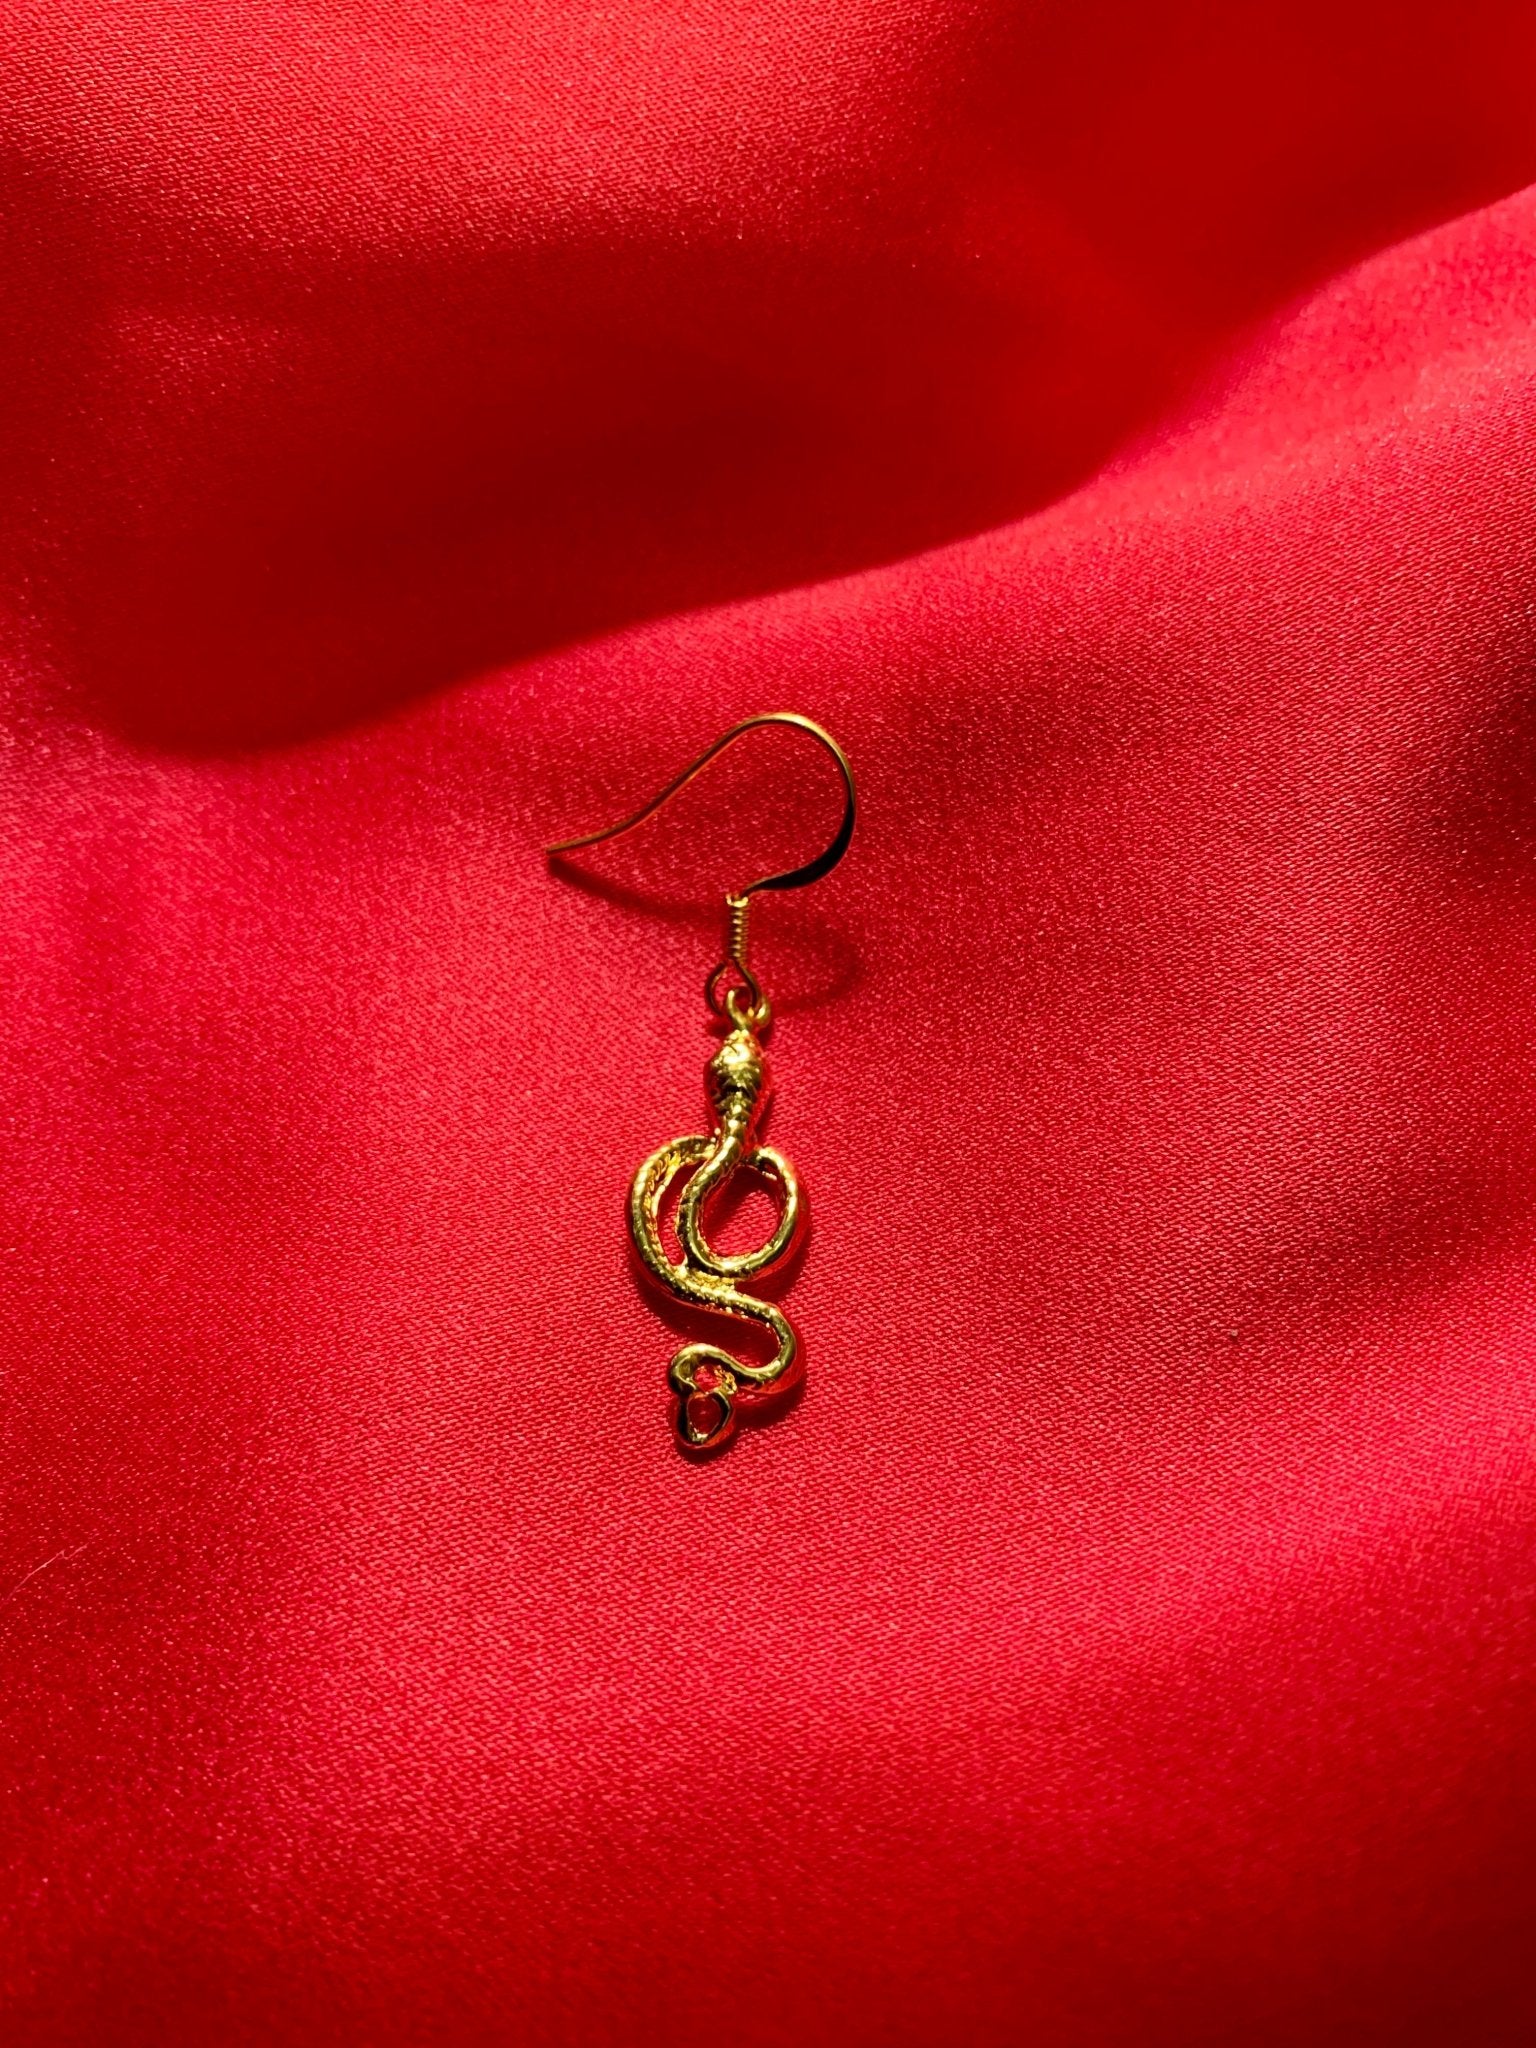 14K plated Coiled Snake Earring - The Nightshift